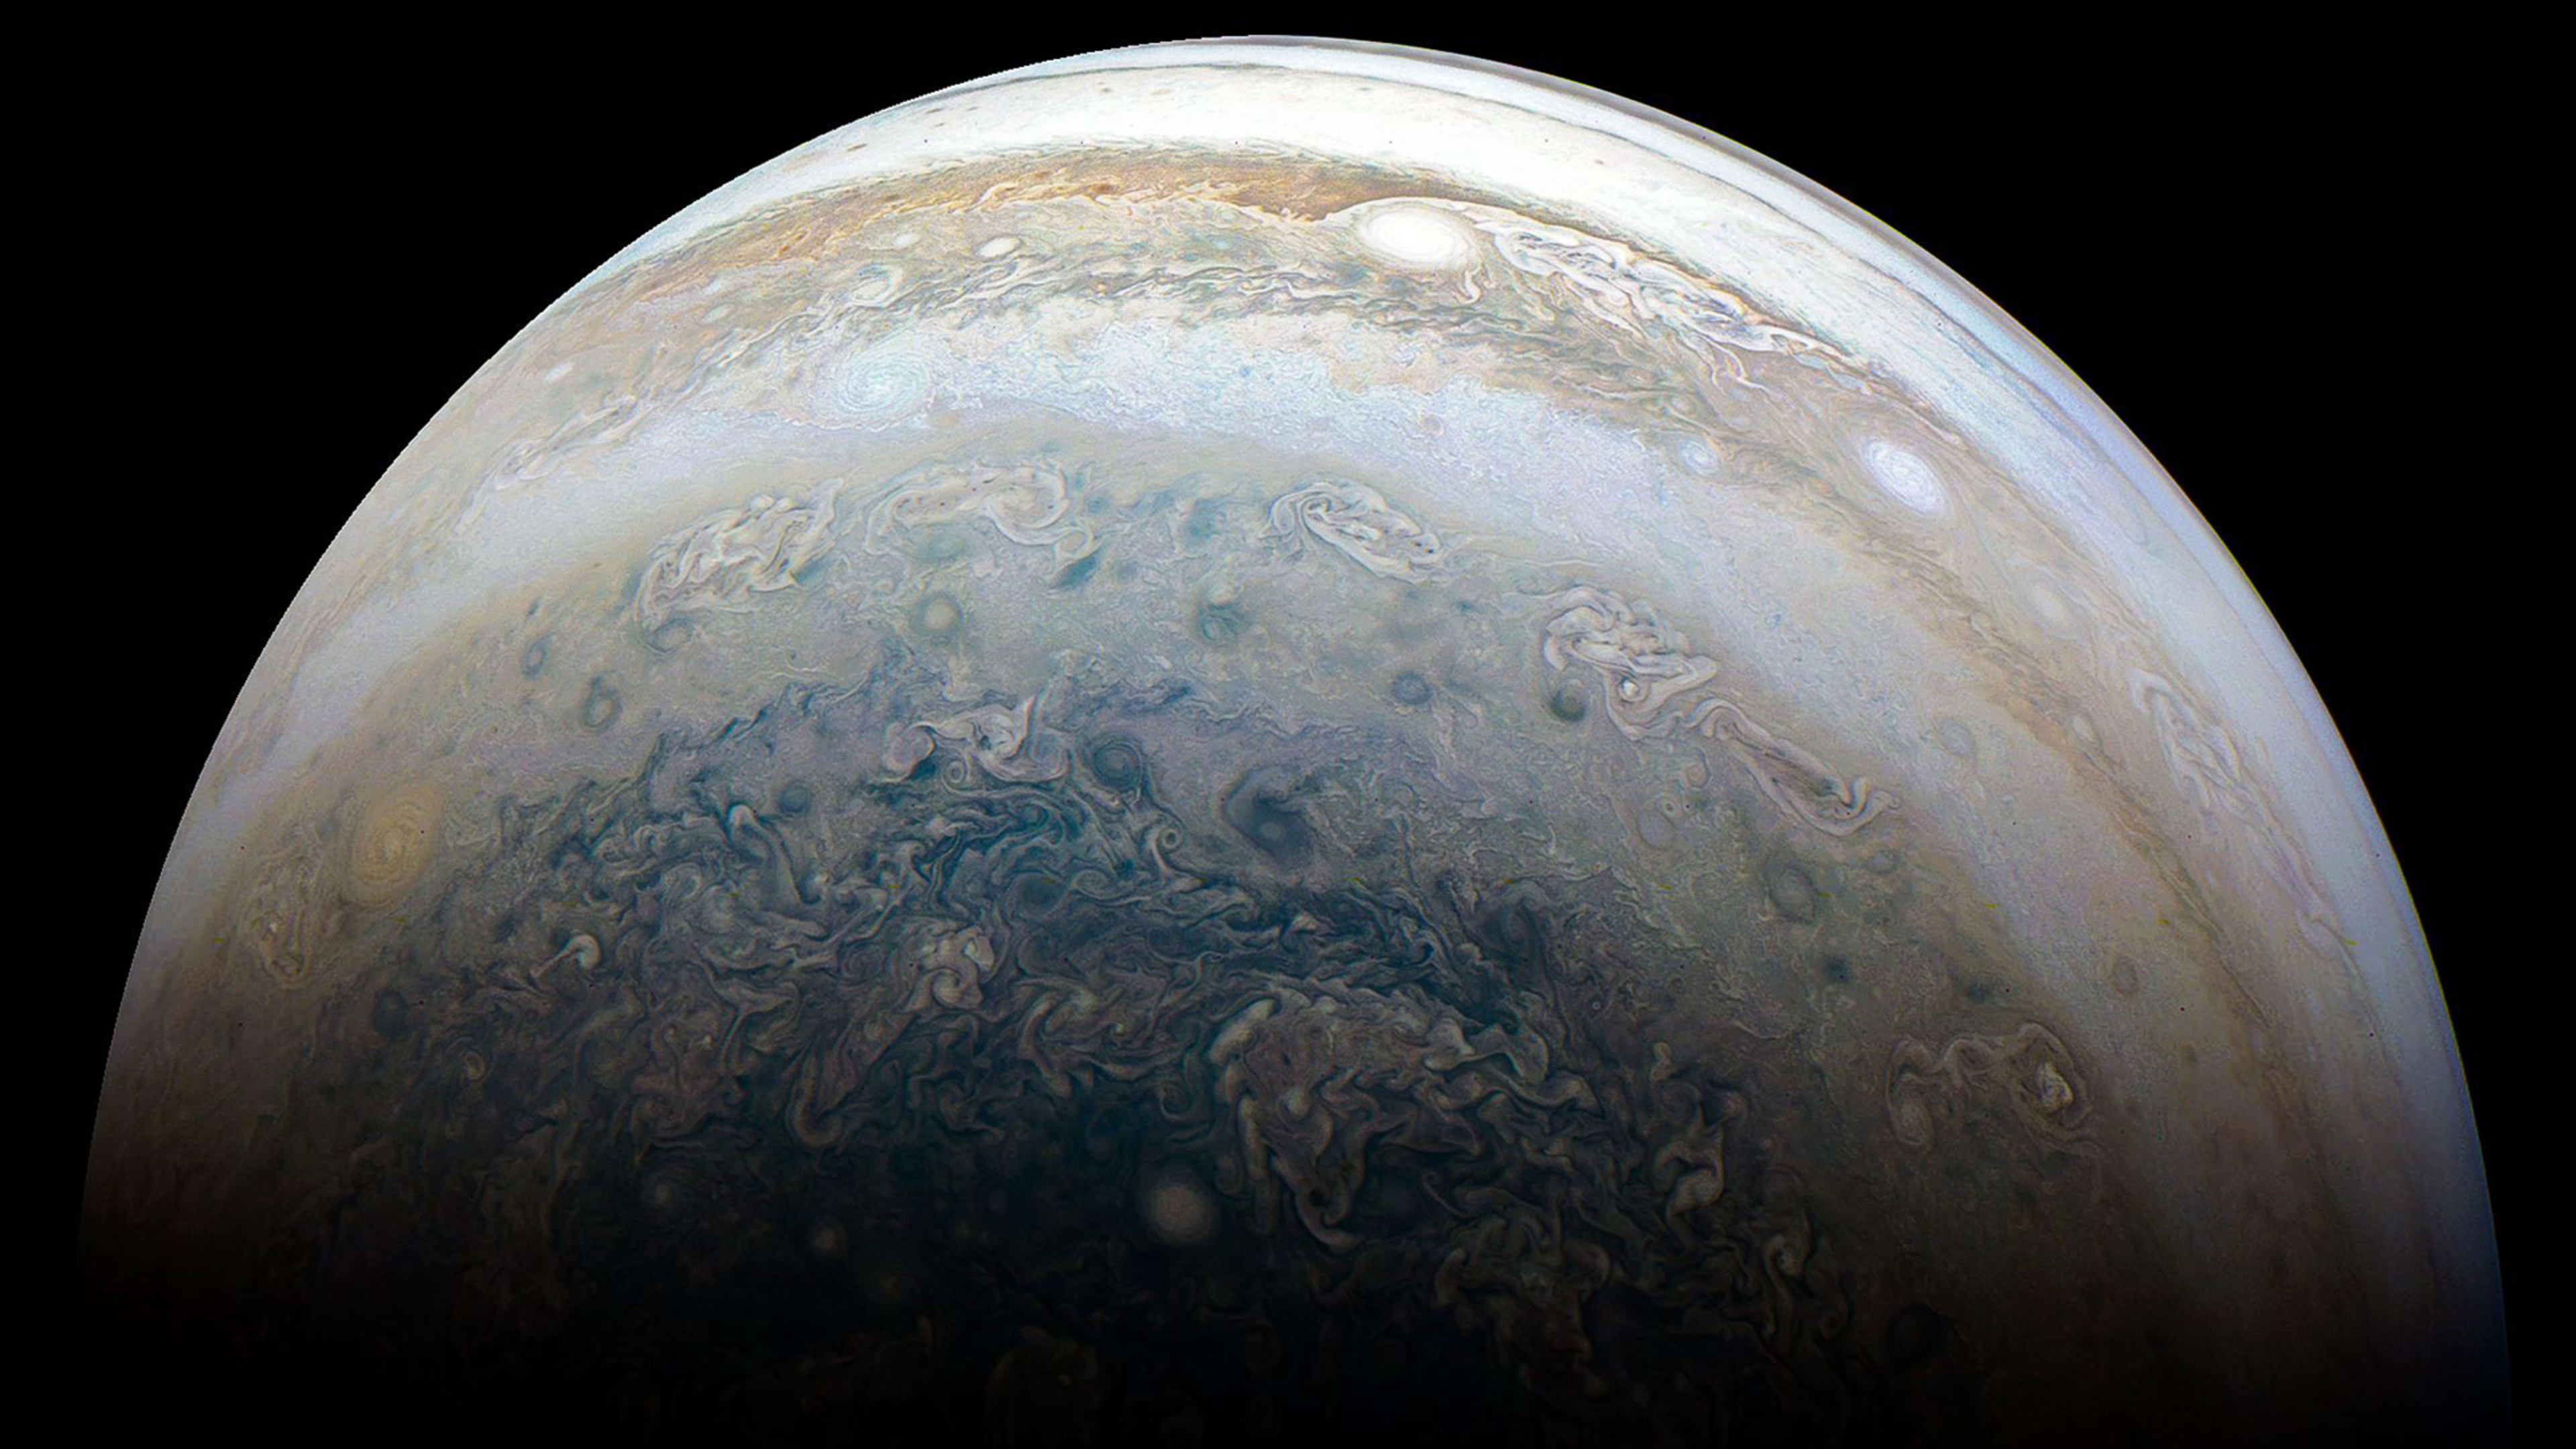 Jupiter has an “oddball” moon and we can relate